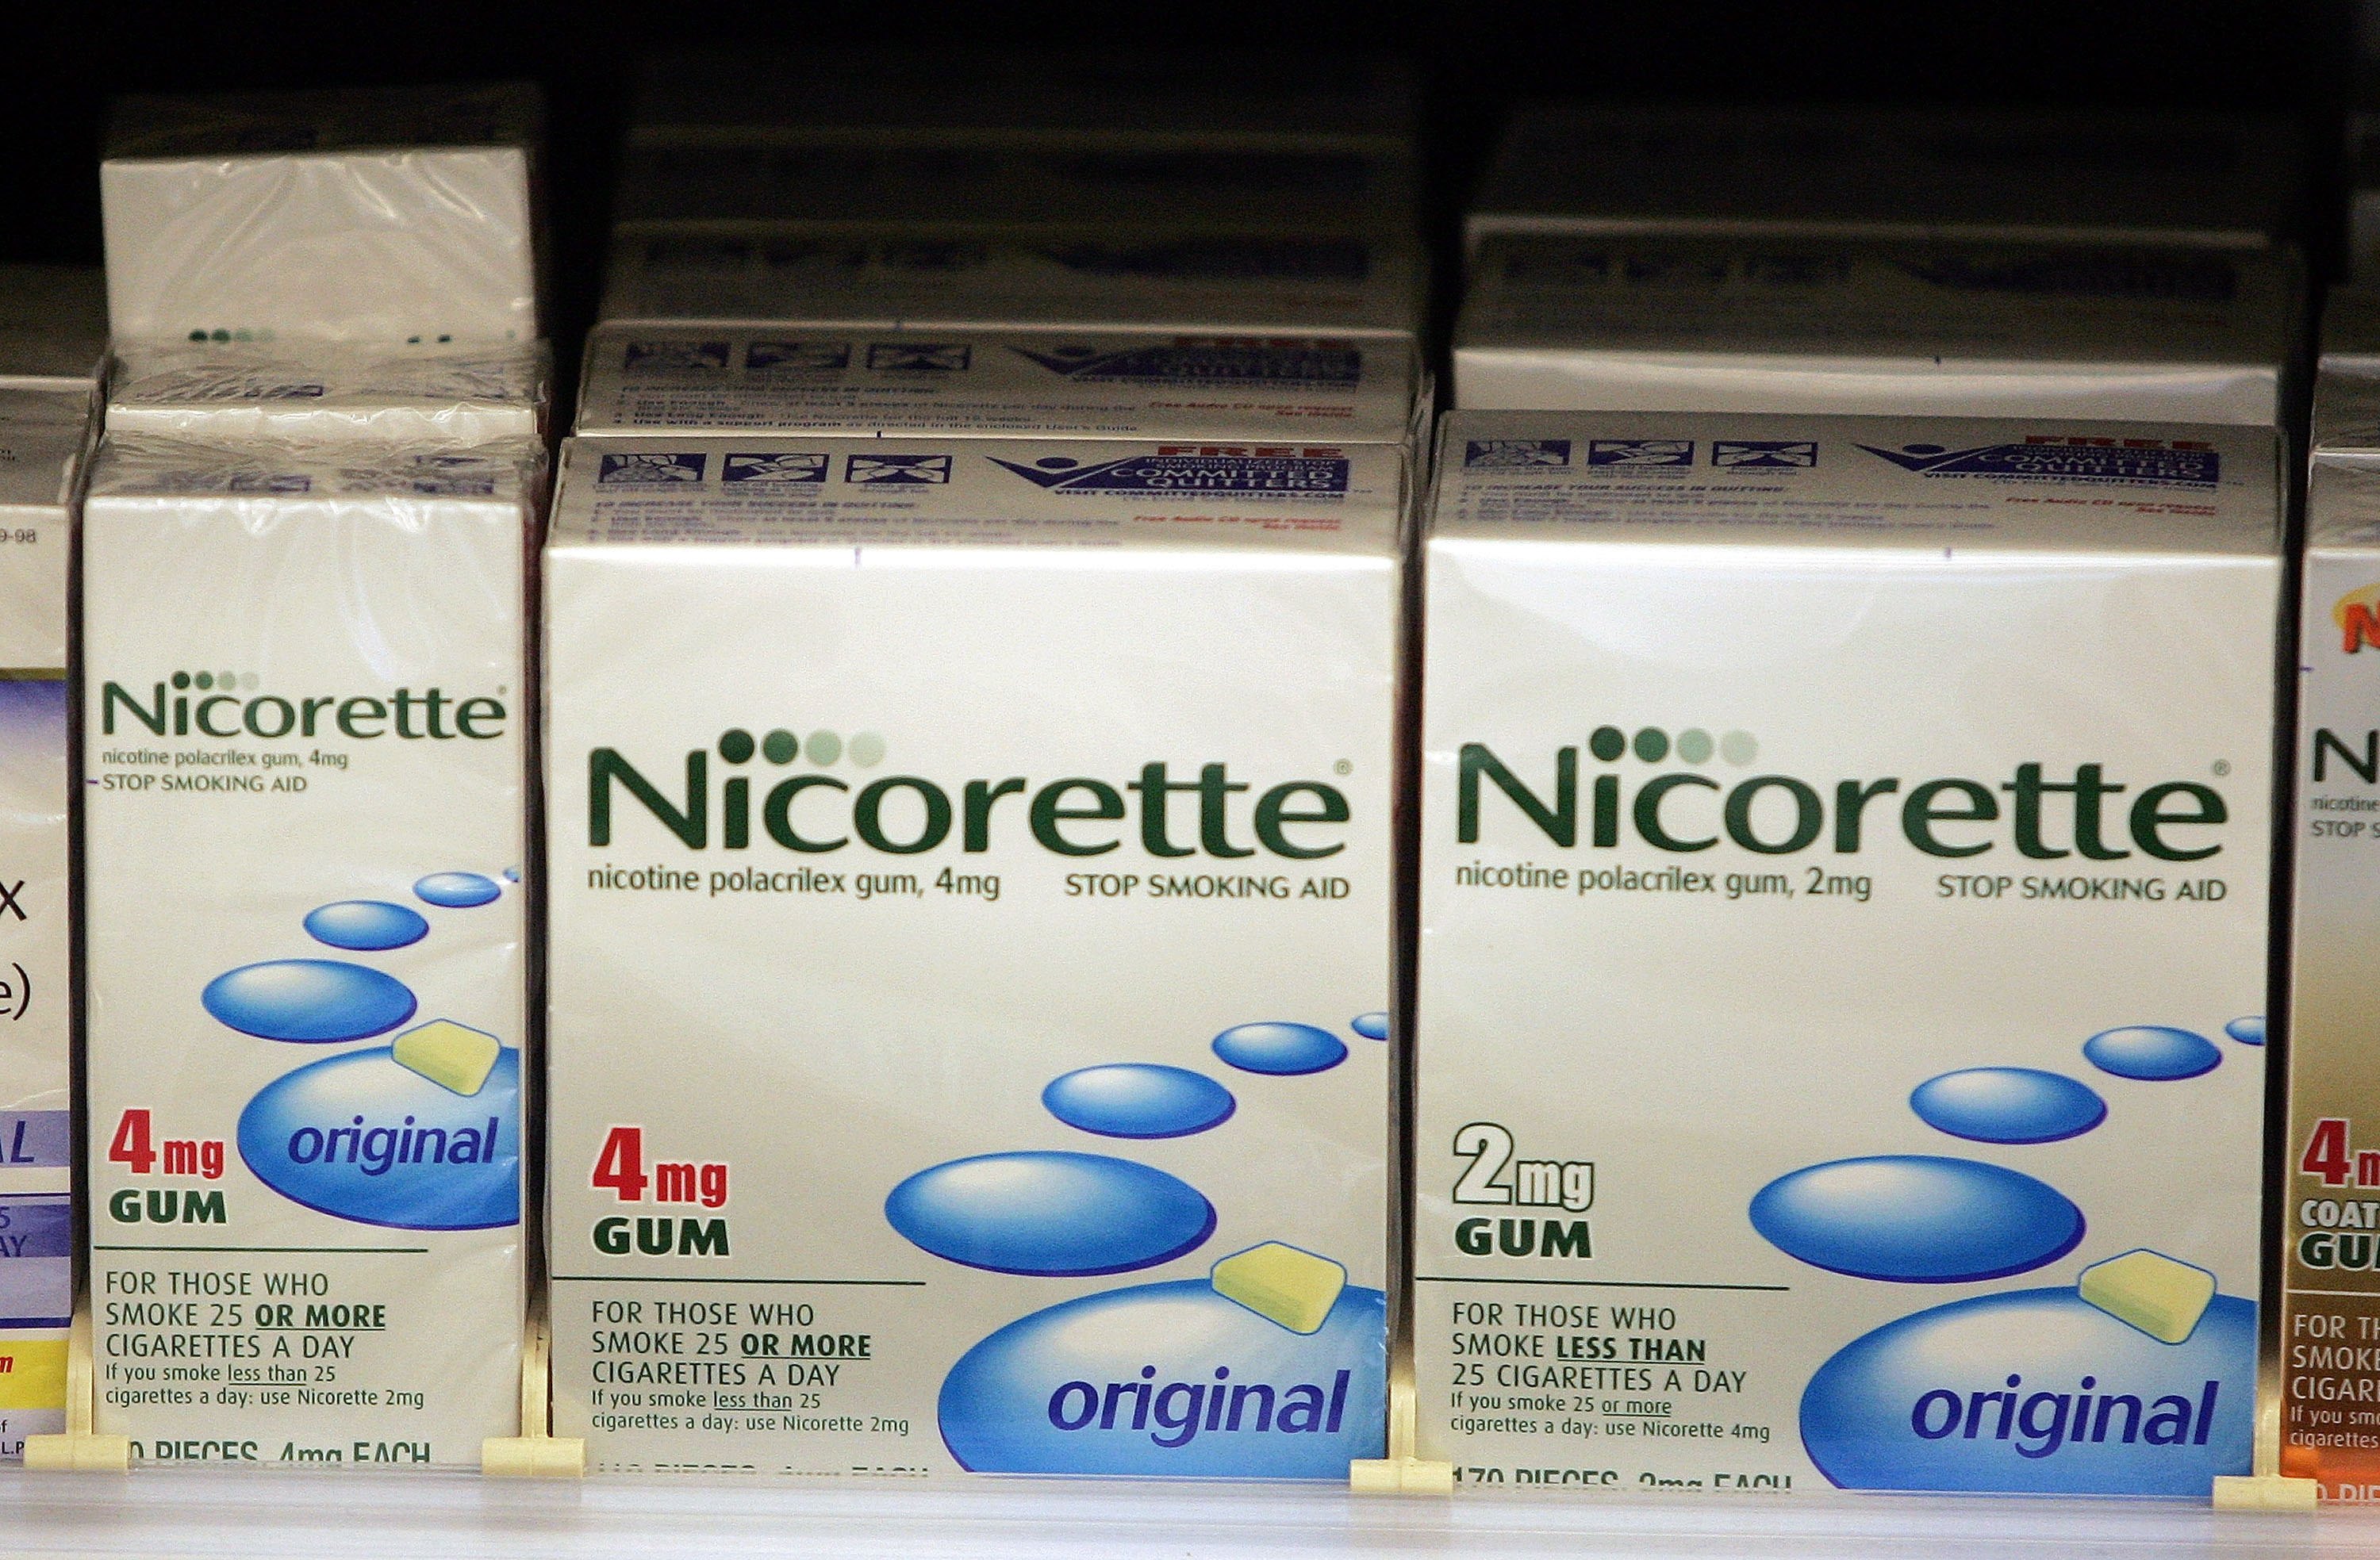 Pfizer's Nicorette stop smoking aid is displayed on a shelf at a Walgreens store June 26, 2006 in Chicago, Illinois. (Photo by Tim Boyle/Getty Images)